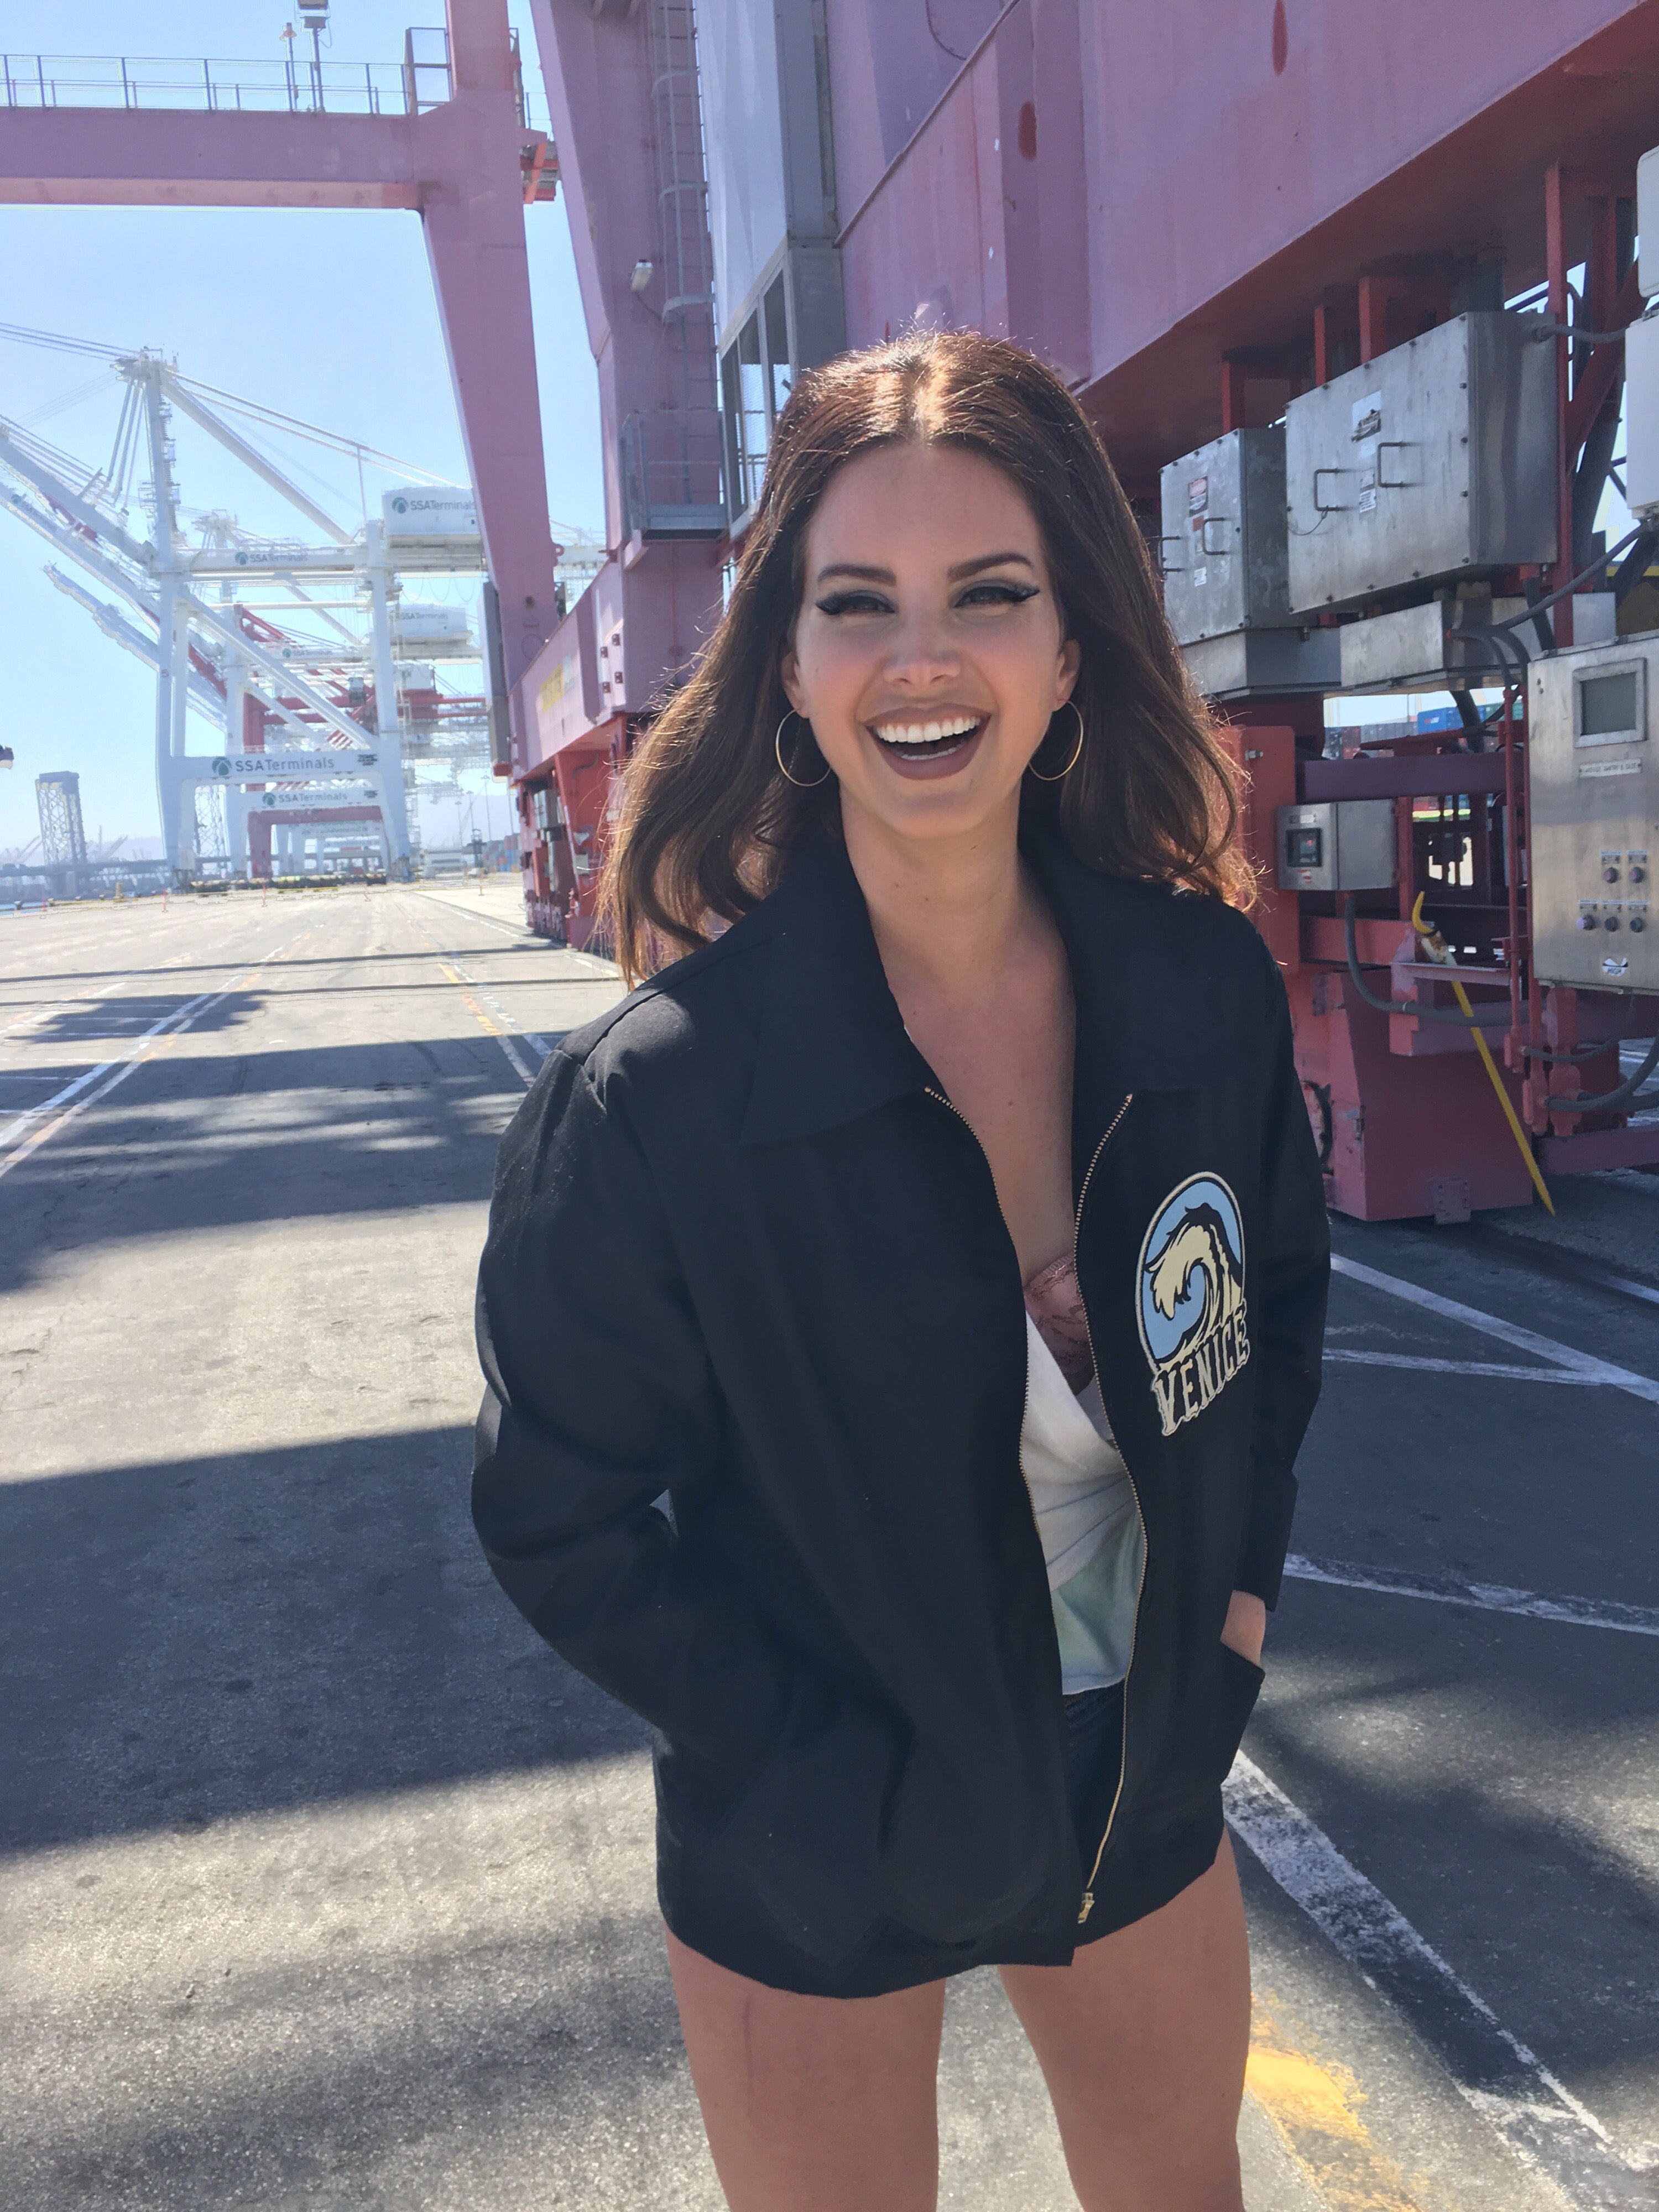 Lana Del Rey - One Special Night, One Special Show - Platinum Tickets presale passwords